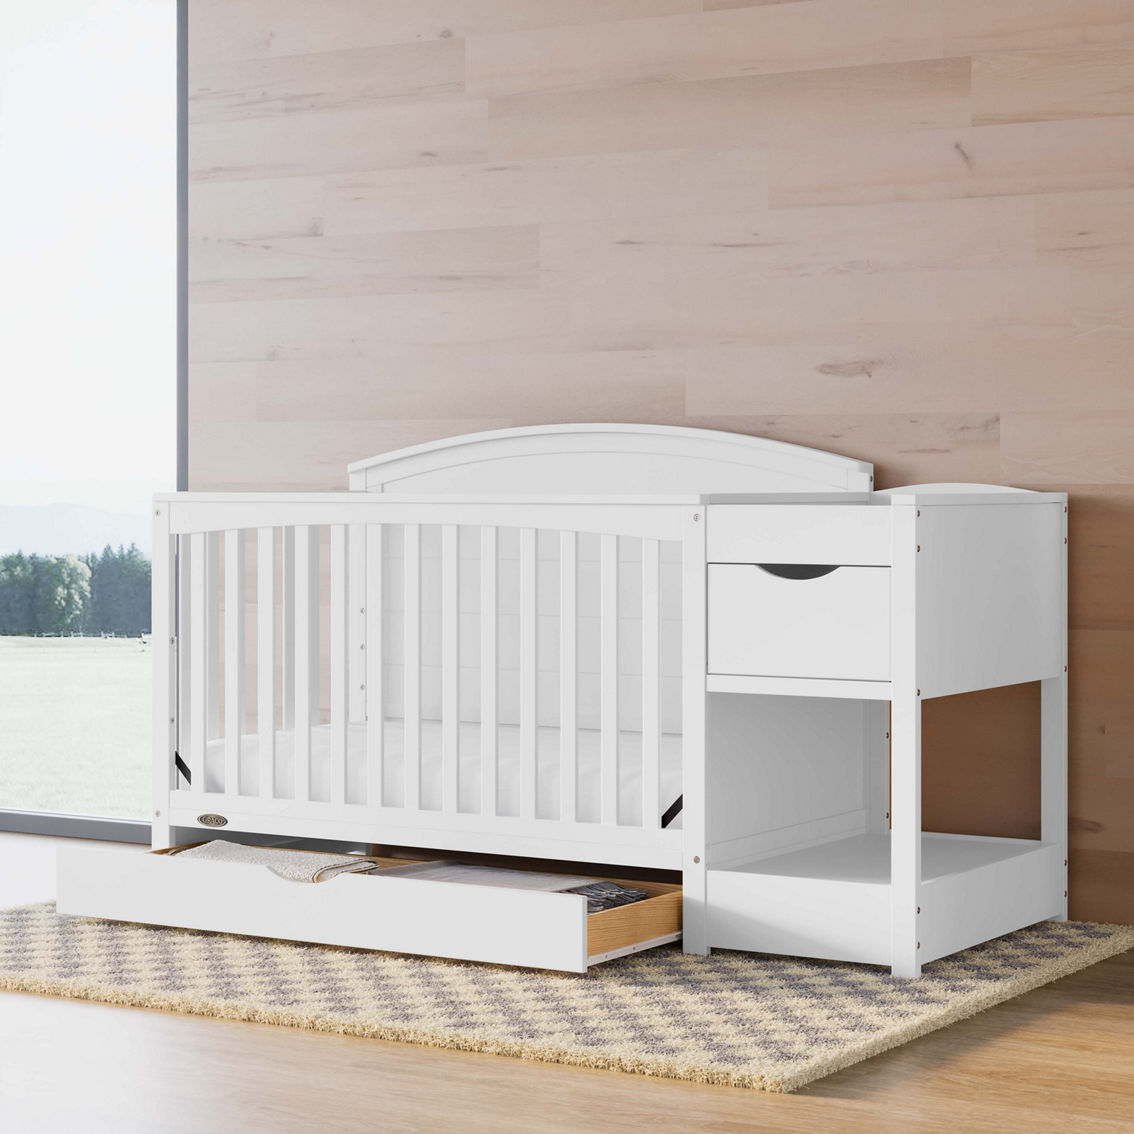 Graco Bellwood 5-in-1 Convertible Crib and Changer - Image 9 of 10